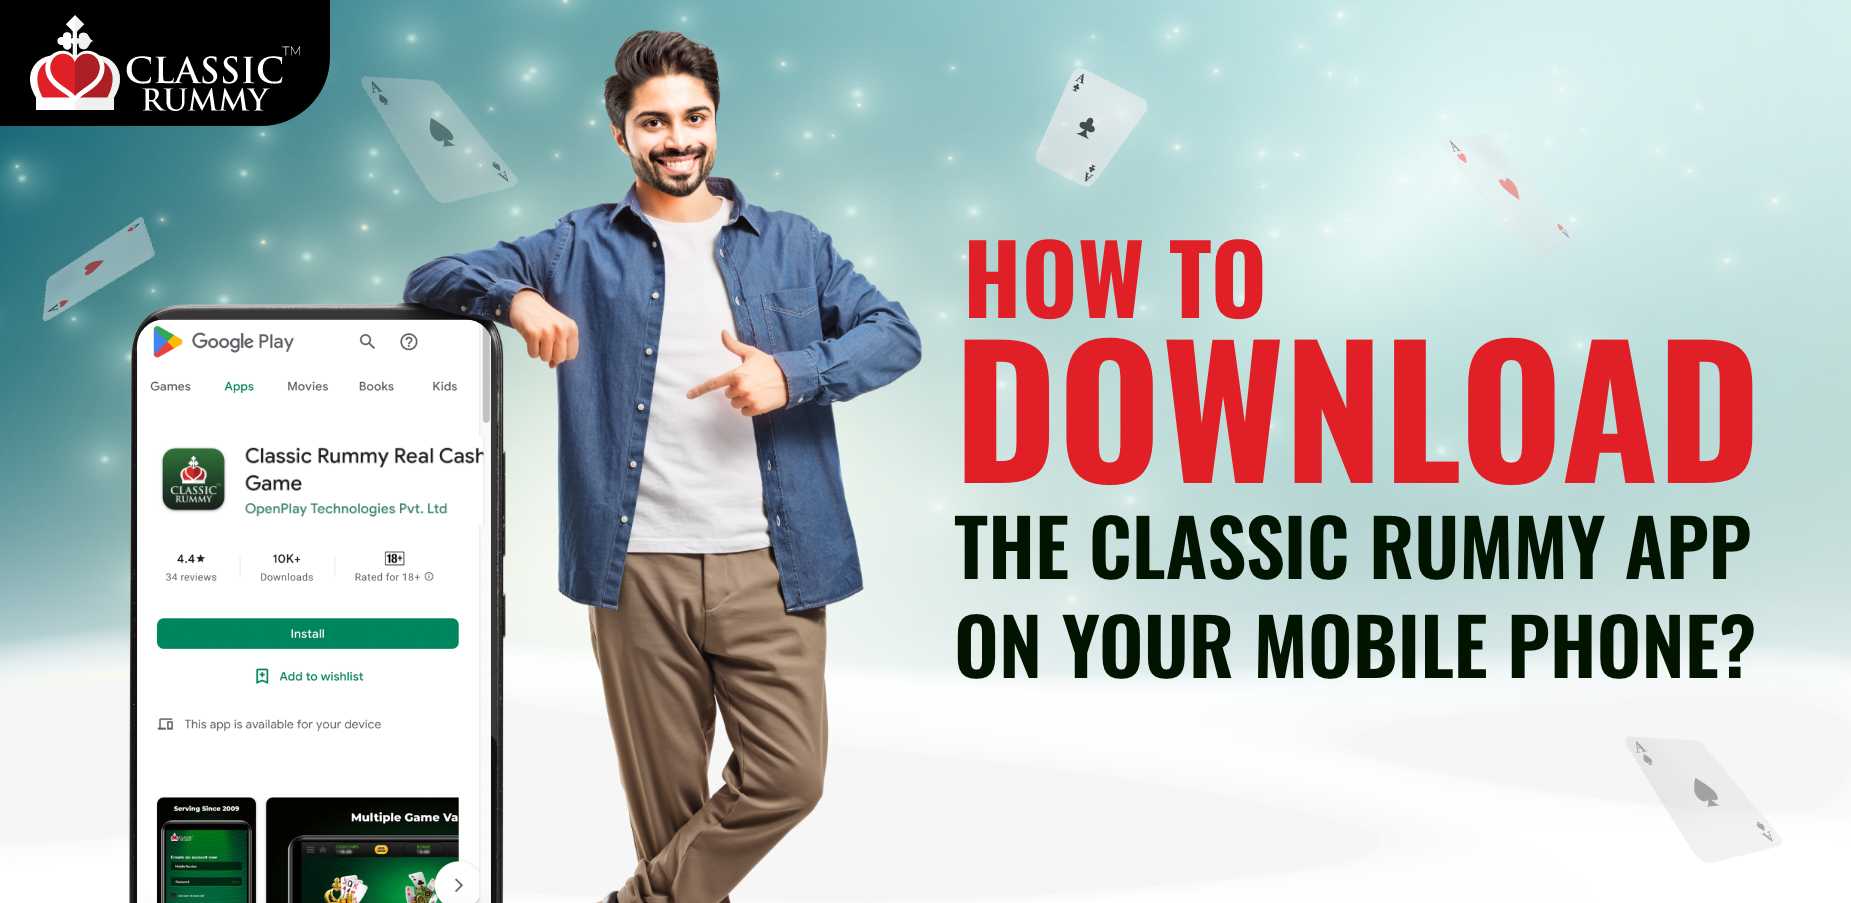 How to Download the Classic Rummy App on Your Mobile Phone?